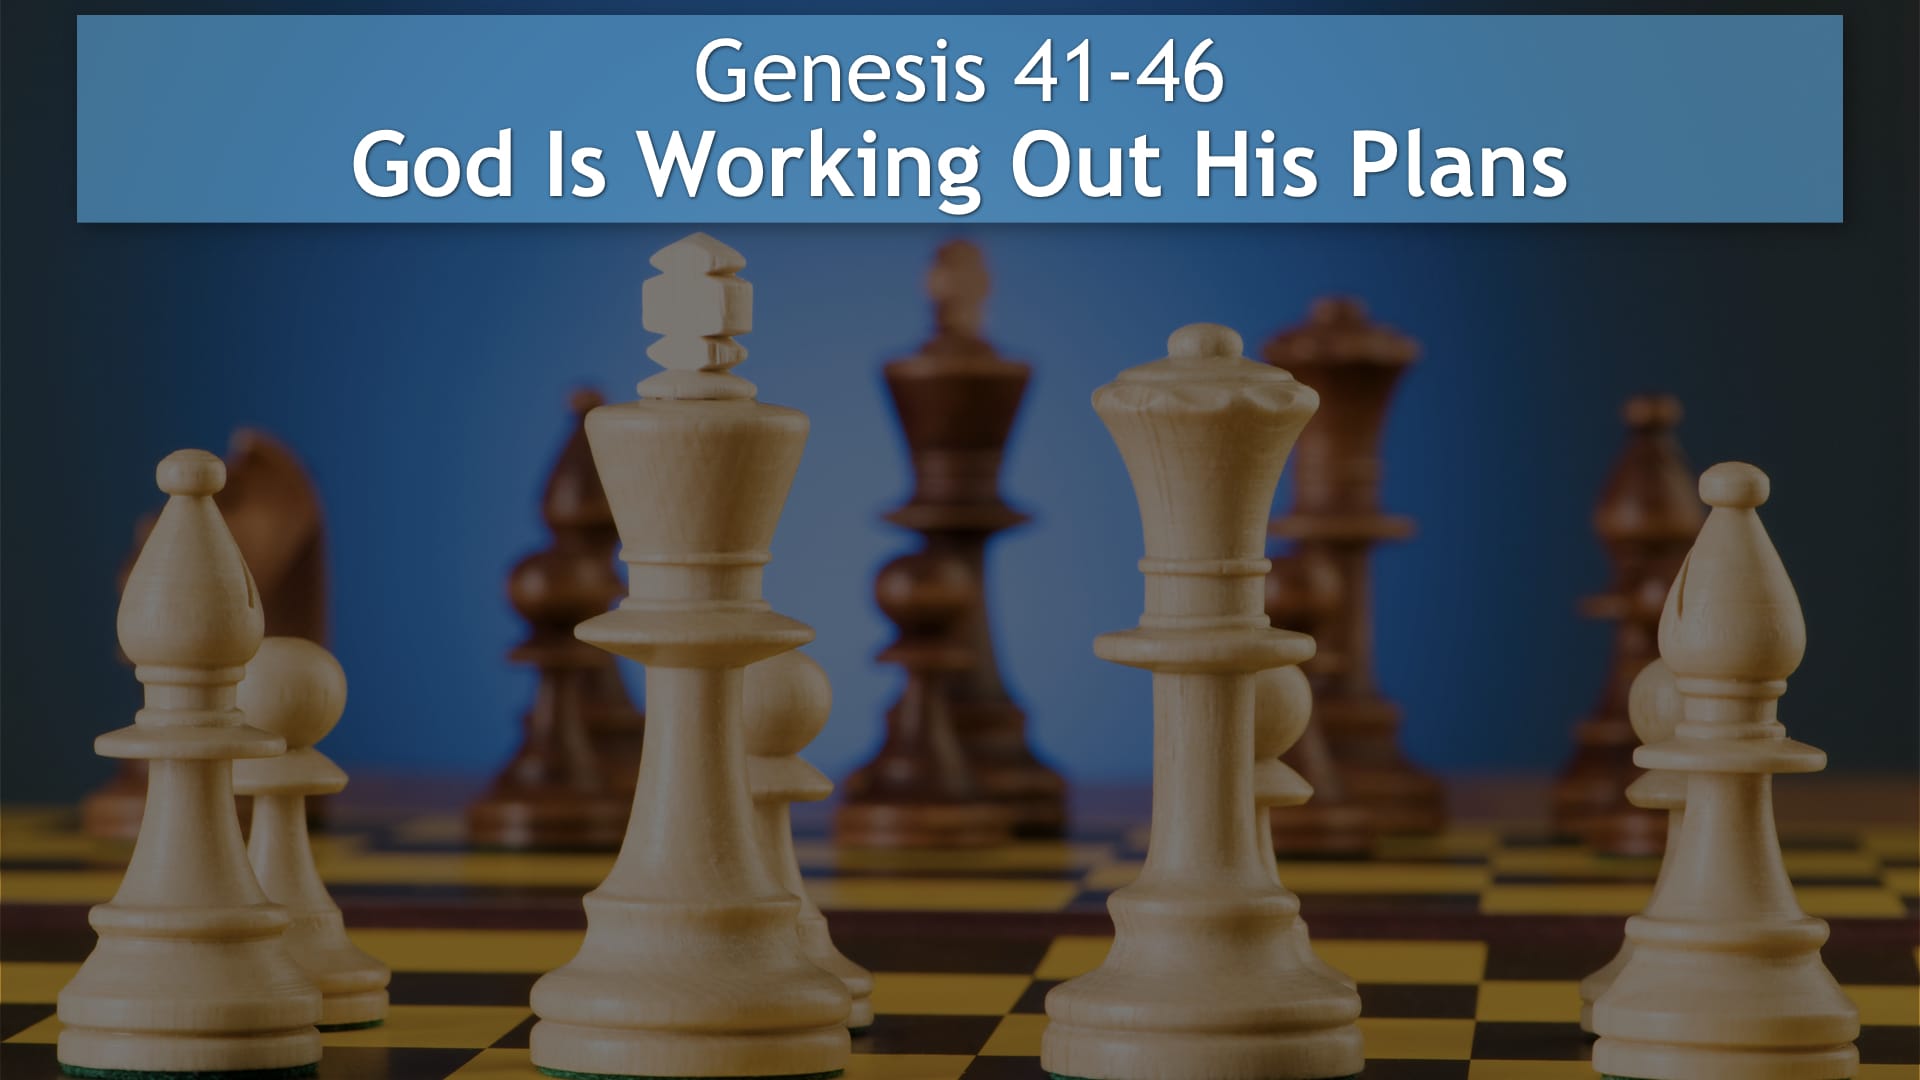 Jerry Simmons teaching Genesis 41-46, God Is Working Out His Plans